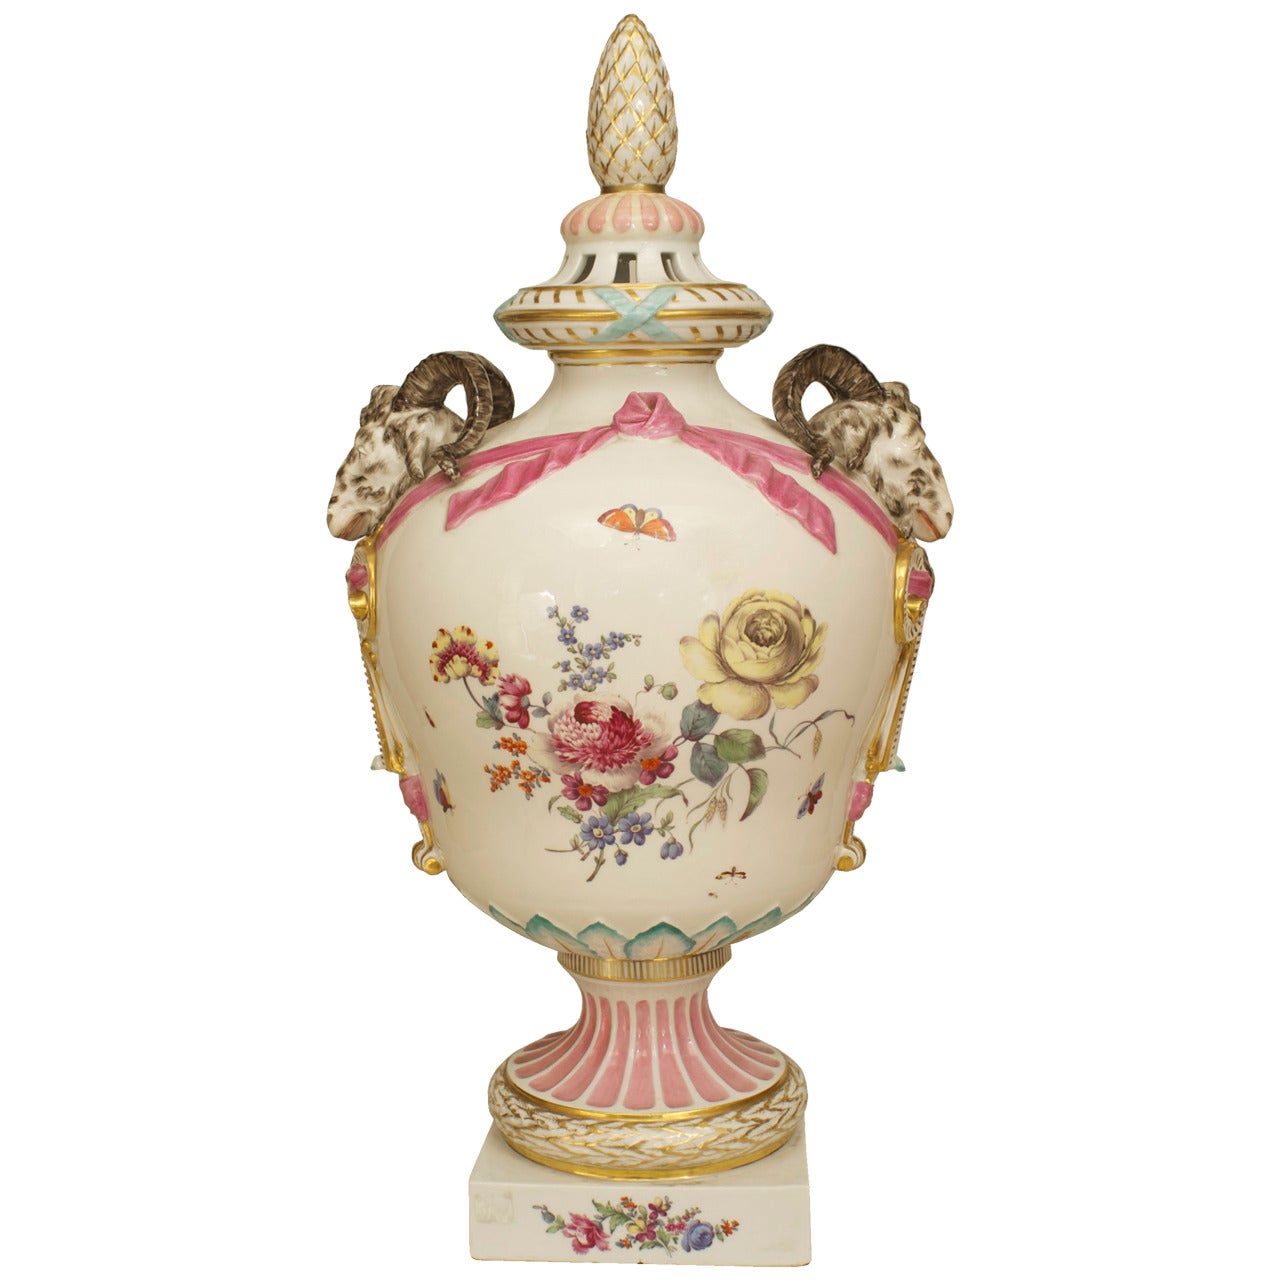 A Fine 18th Century Continental German Porcelain Decorated Urn For Sale